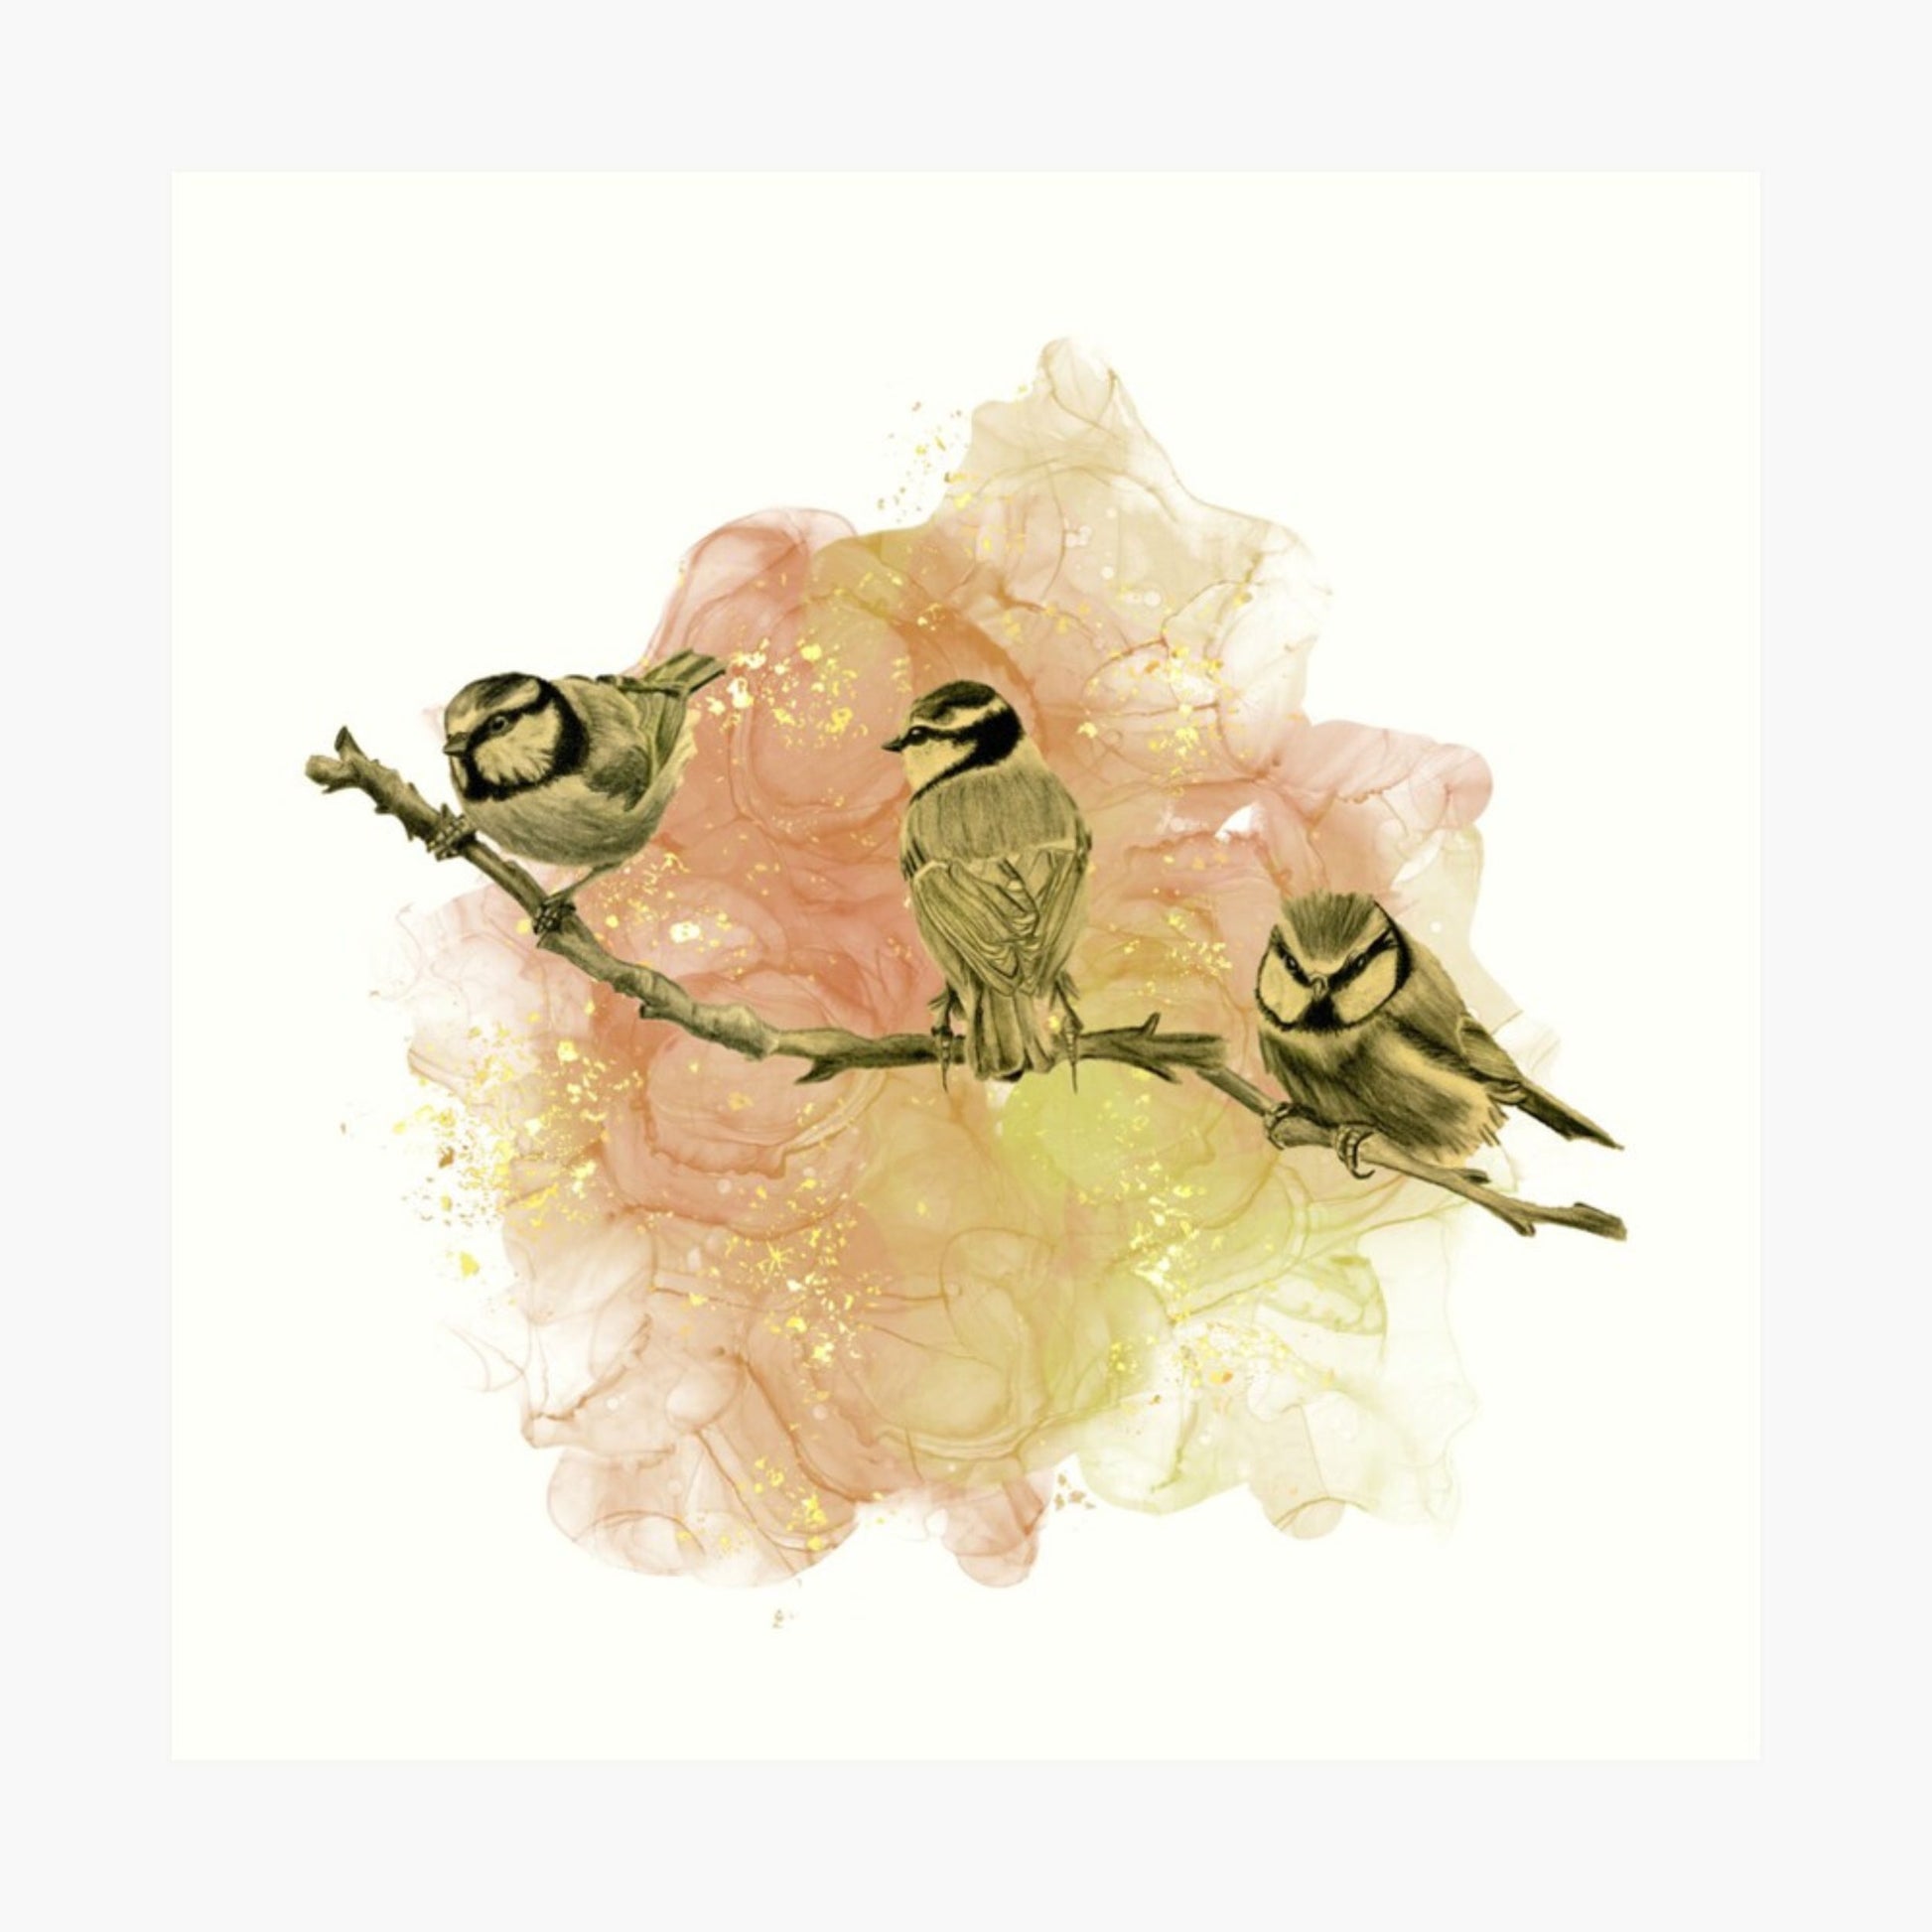 "Golden Blue Tits." This limited edition art print captures the essence of elegance and natural beauty in every intricate detail.